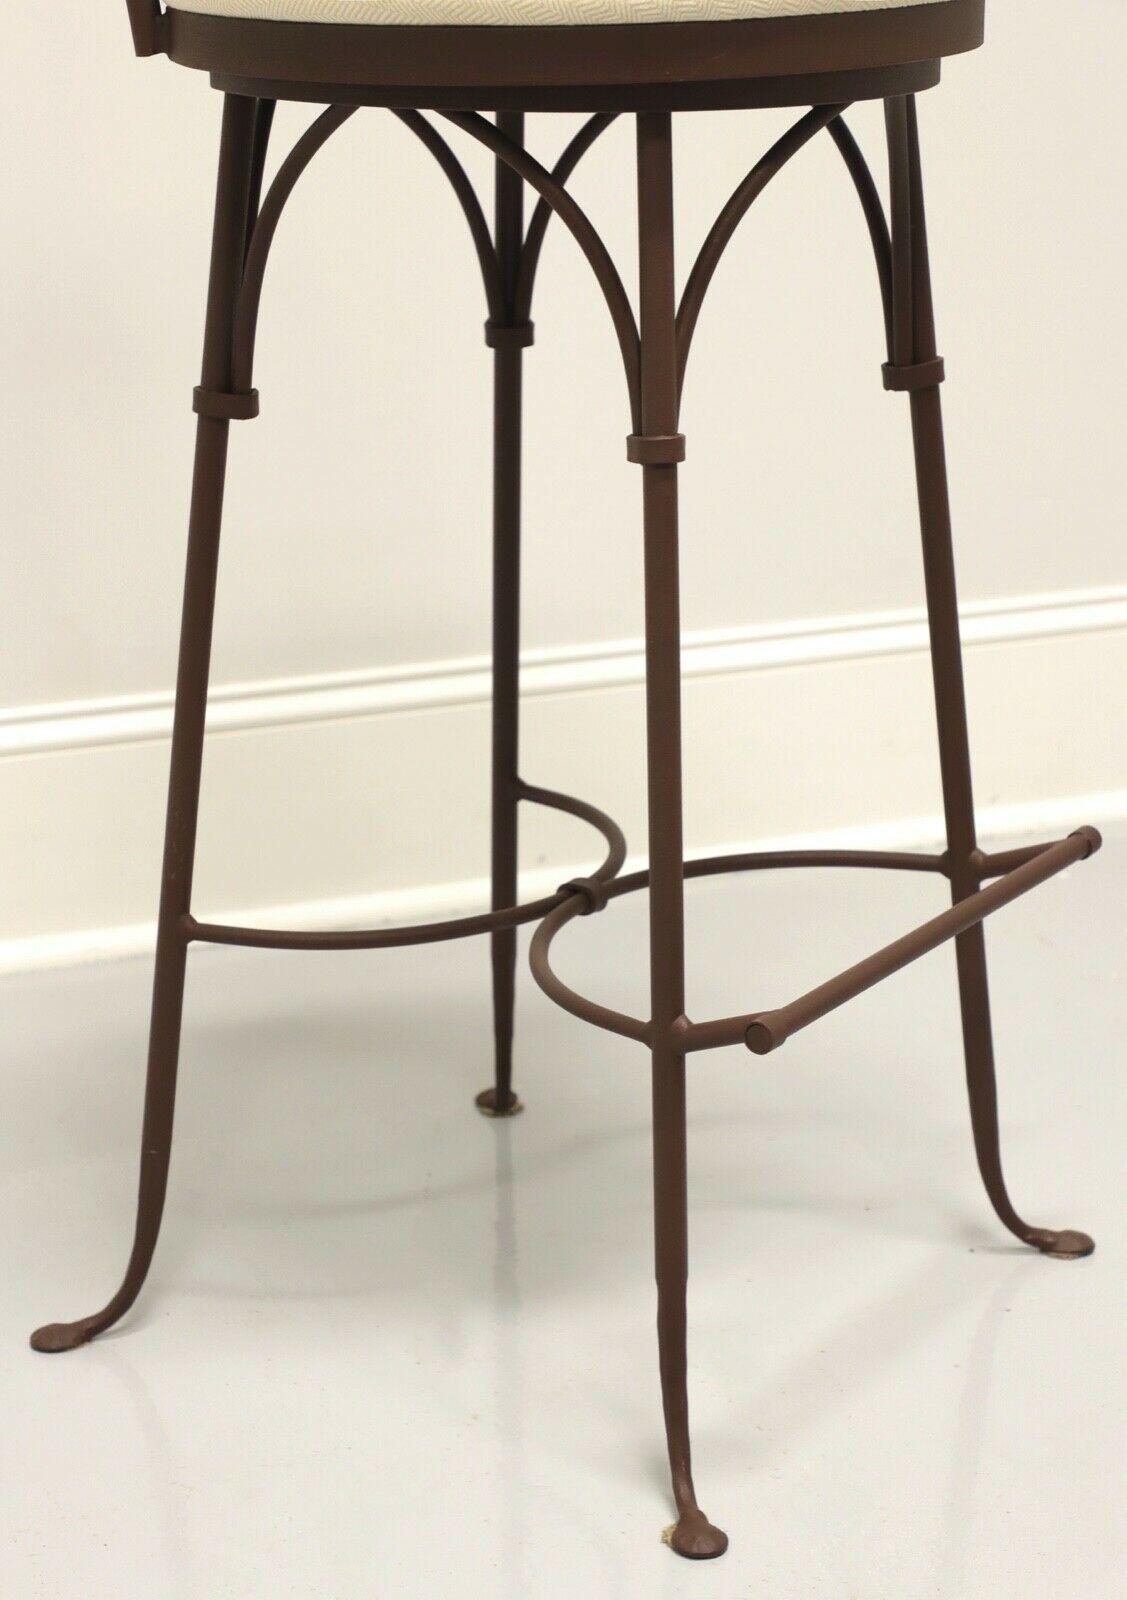 Contemporary CHARLESTON FORGE Wrought Iron Shaker Arch Bar Height Swivel Stools - Pair E